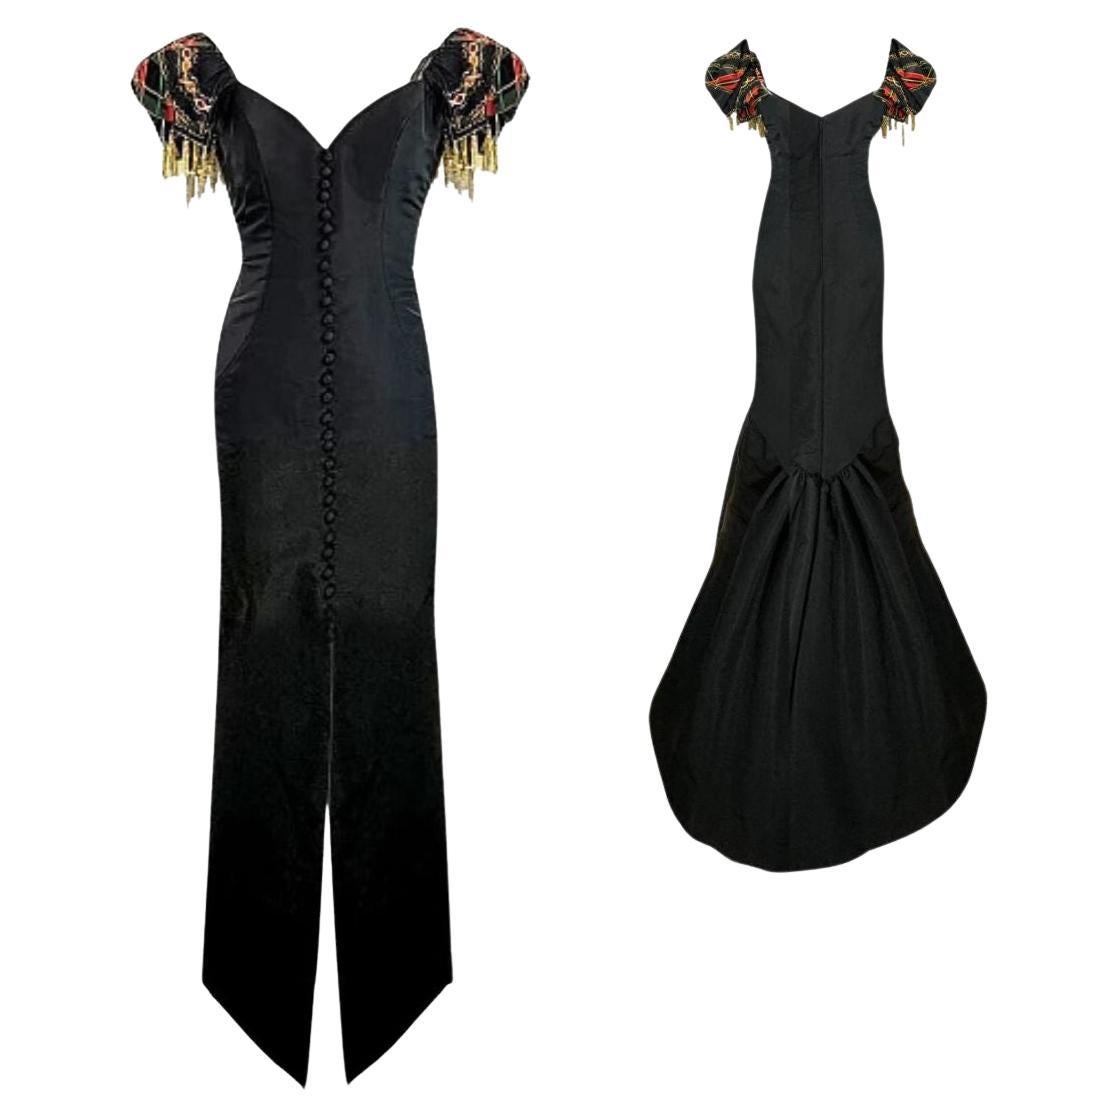 Bob Mackie Vintage Evening Gown with Puffed Sleeves & Beaded Tassels 1990 Sz 6 For Sale